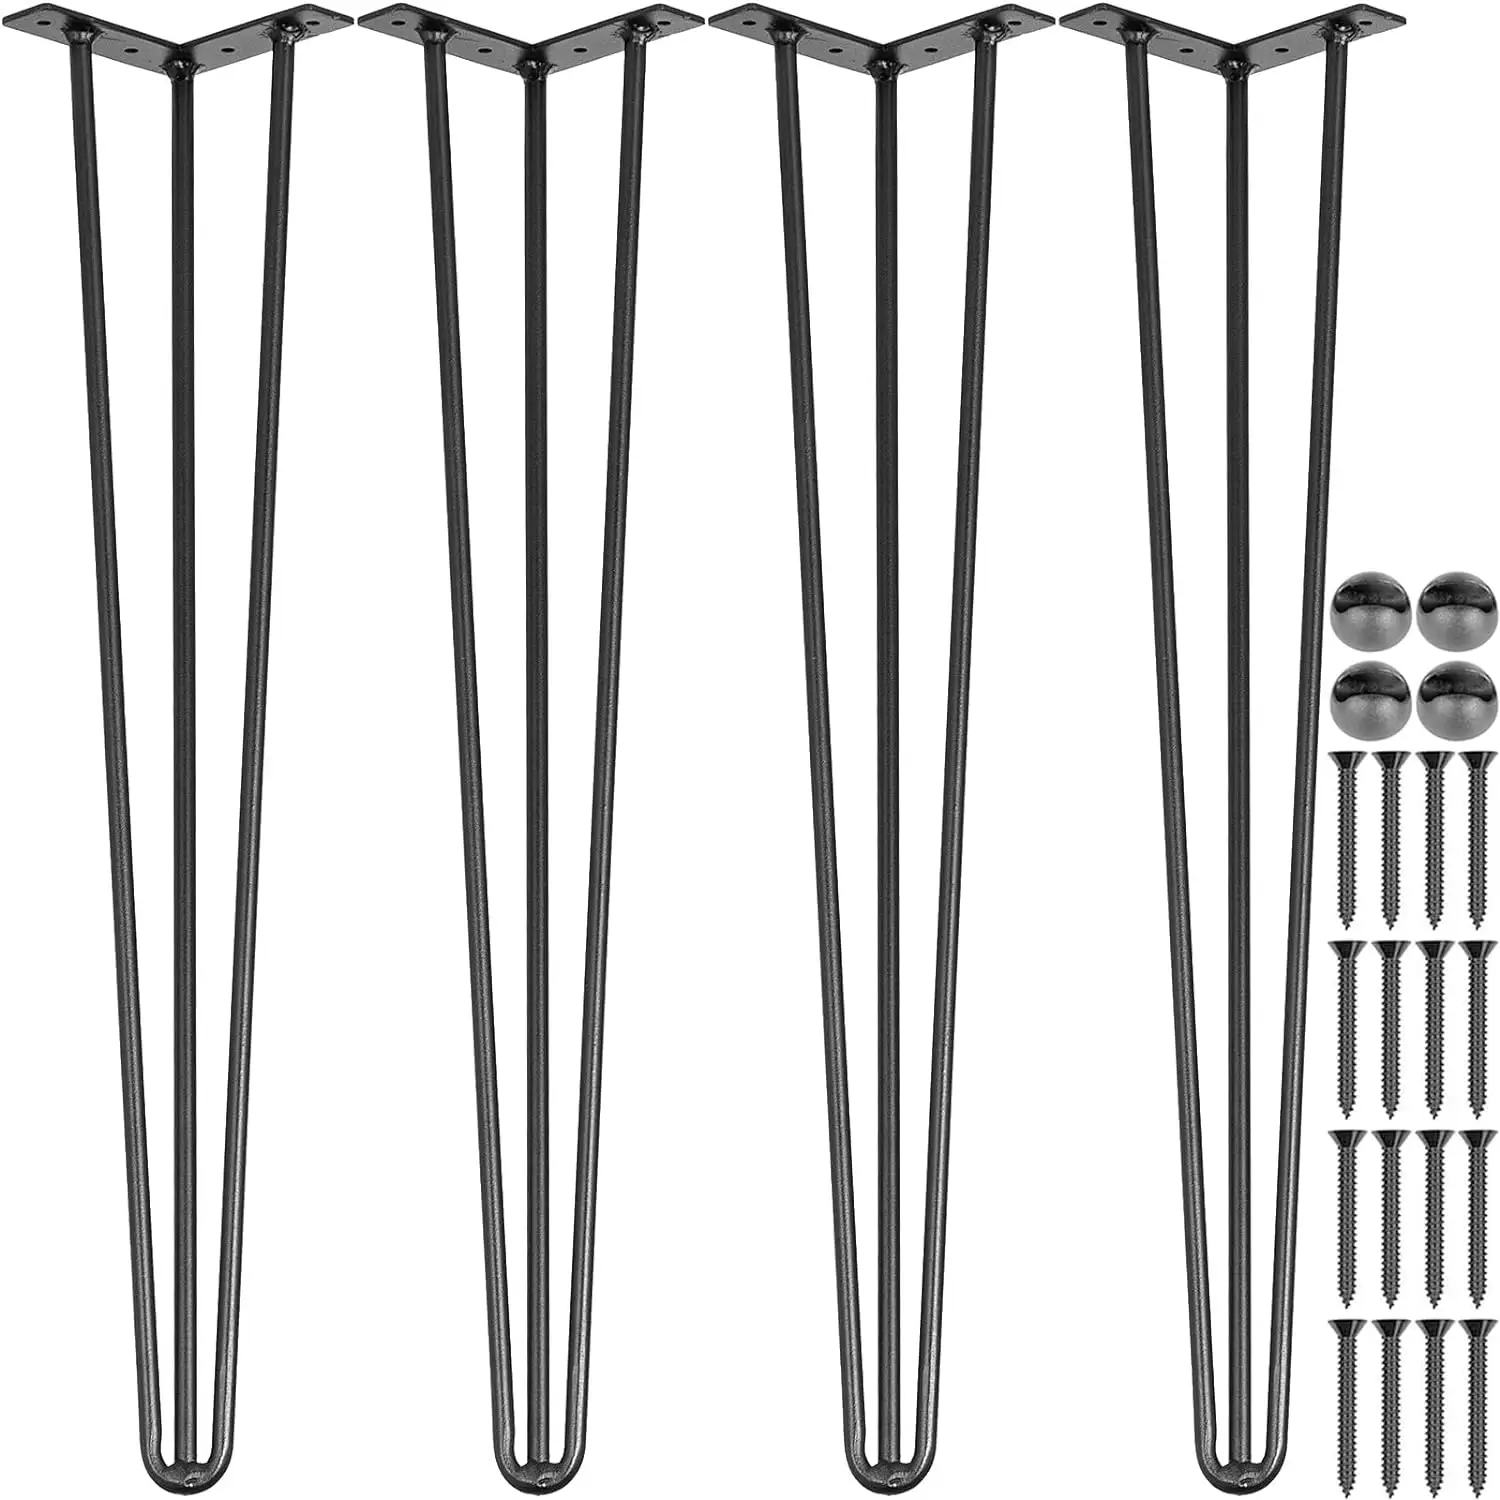 28 Inch Hairpin Table Legs, 3 Steel Rods 1/2 Inch Pipe Diameter Hairpin Table Legs